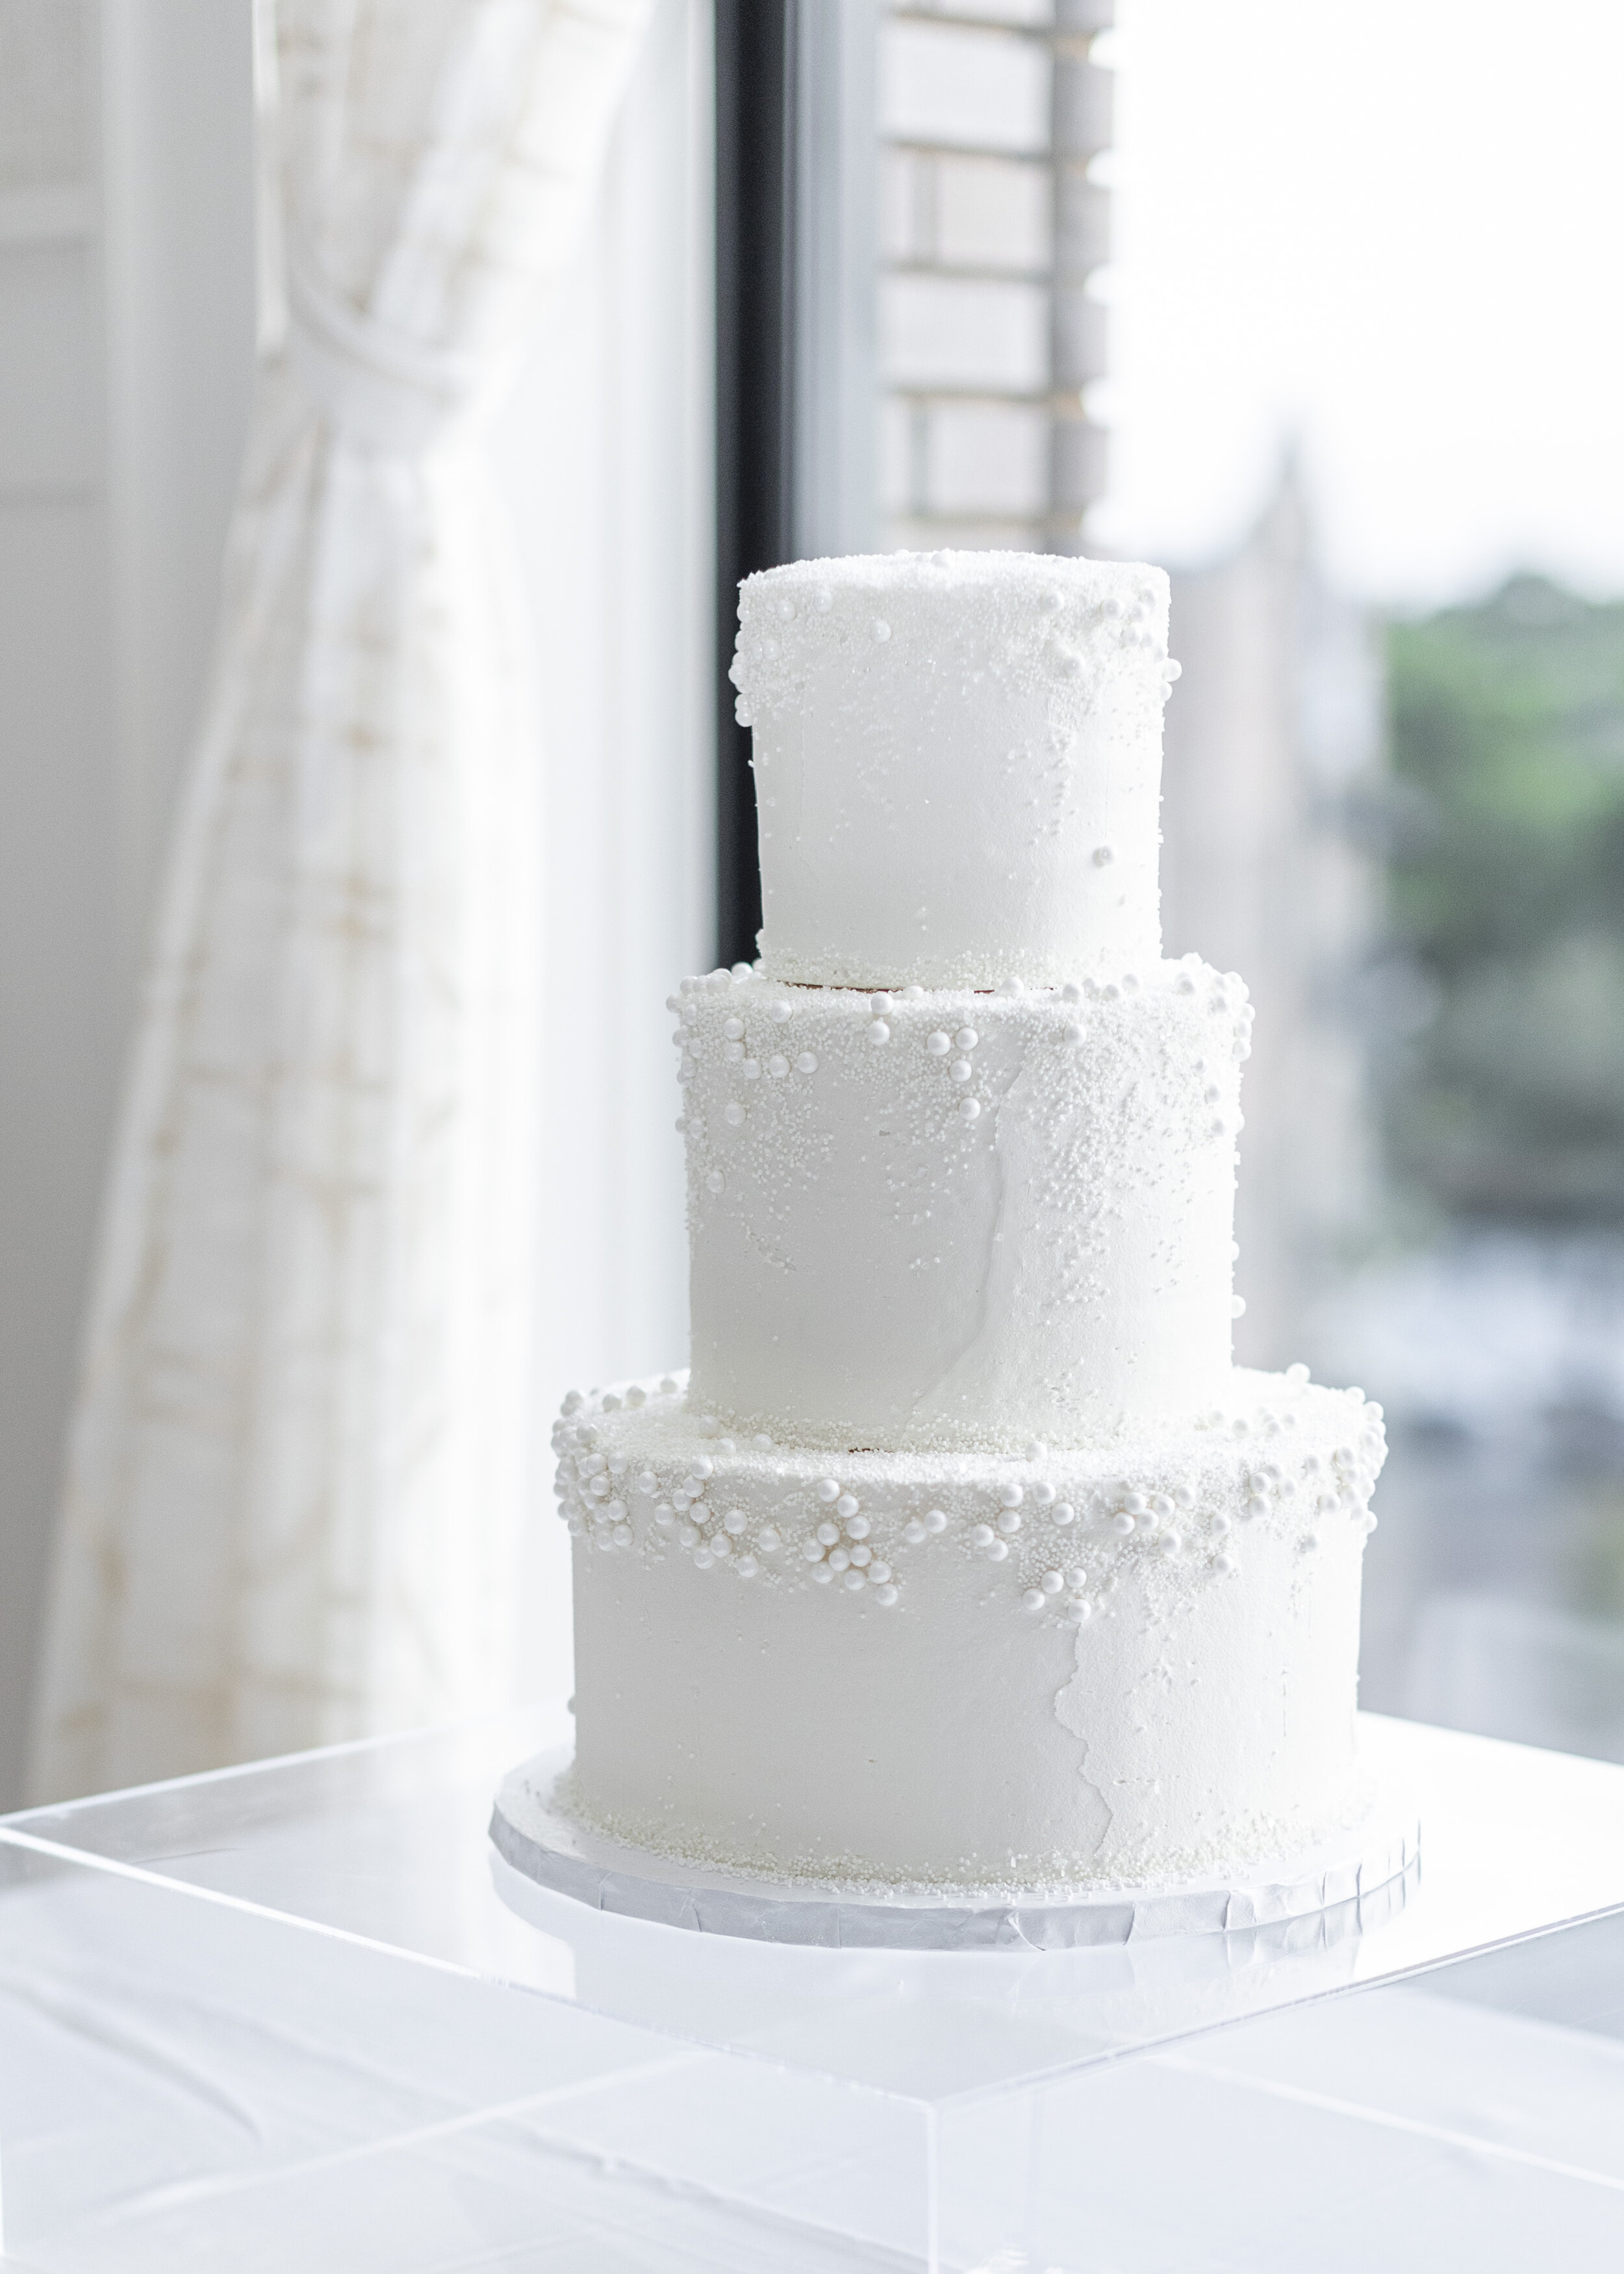  An all-white wedding cake on a clear cake stand makes for a simple yet upscale look. Wedding tablescape wedding cake inspiration white wedding cake high end wedding cake hotel vin grapevine wedding dallas texas wedding photographer wedding cake idea